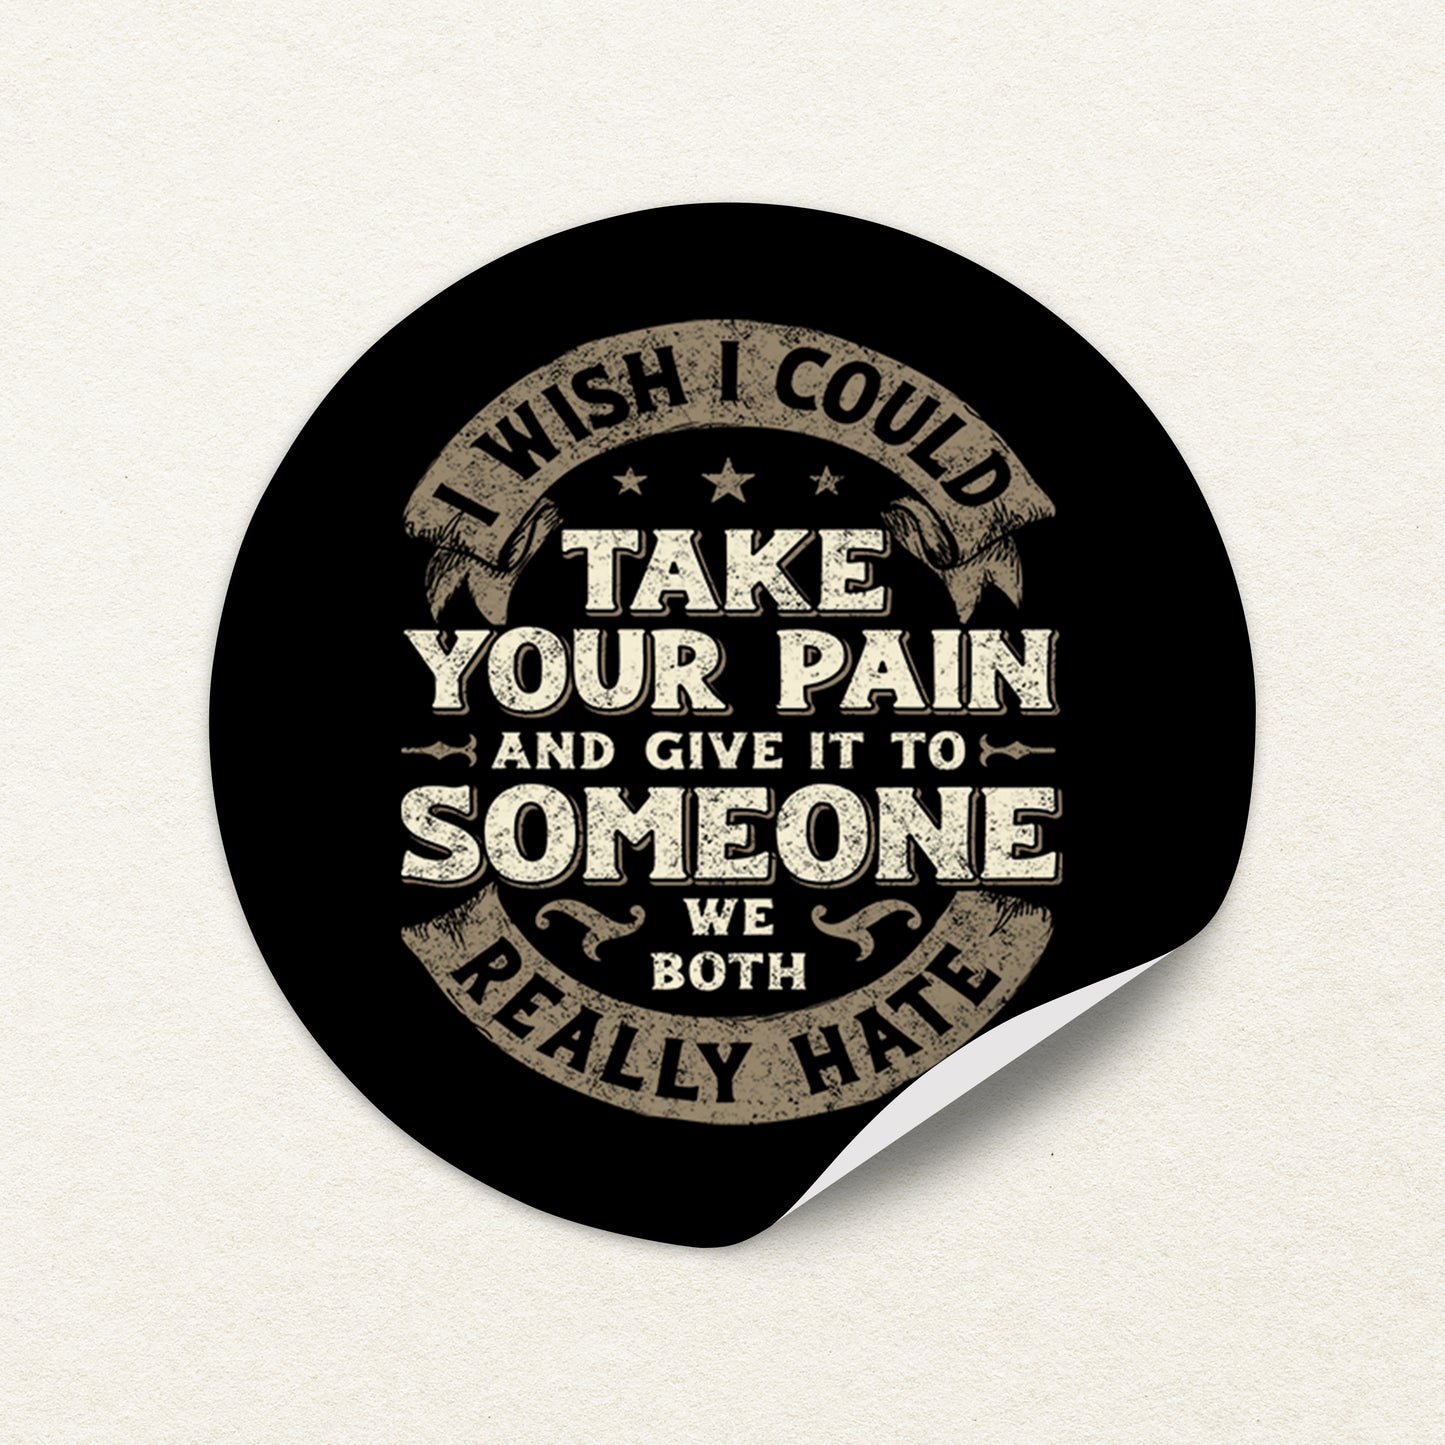 I Wish I Could Take Your Pain Sticker